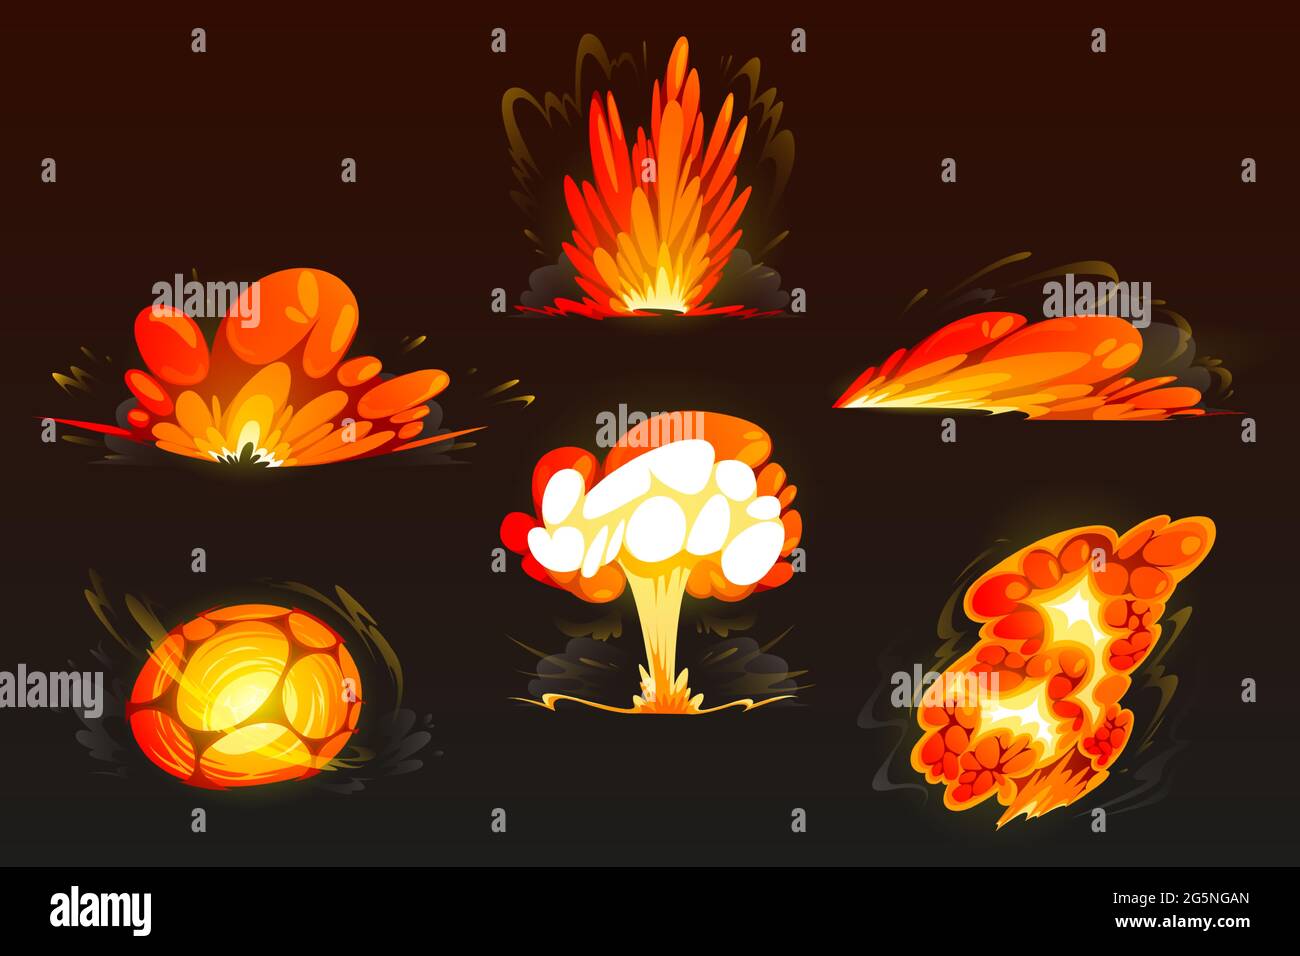 Cartoon bomb explosion set. Clouds, boom effect and smoke elements for ui game design. Dynamite danger explosive detonation, atomic comics fire detonators for mobile animation isolated vector icons Stock Vector